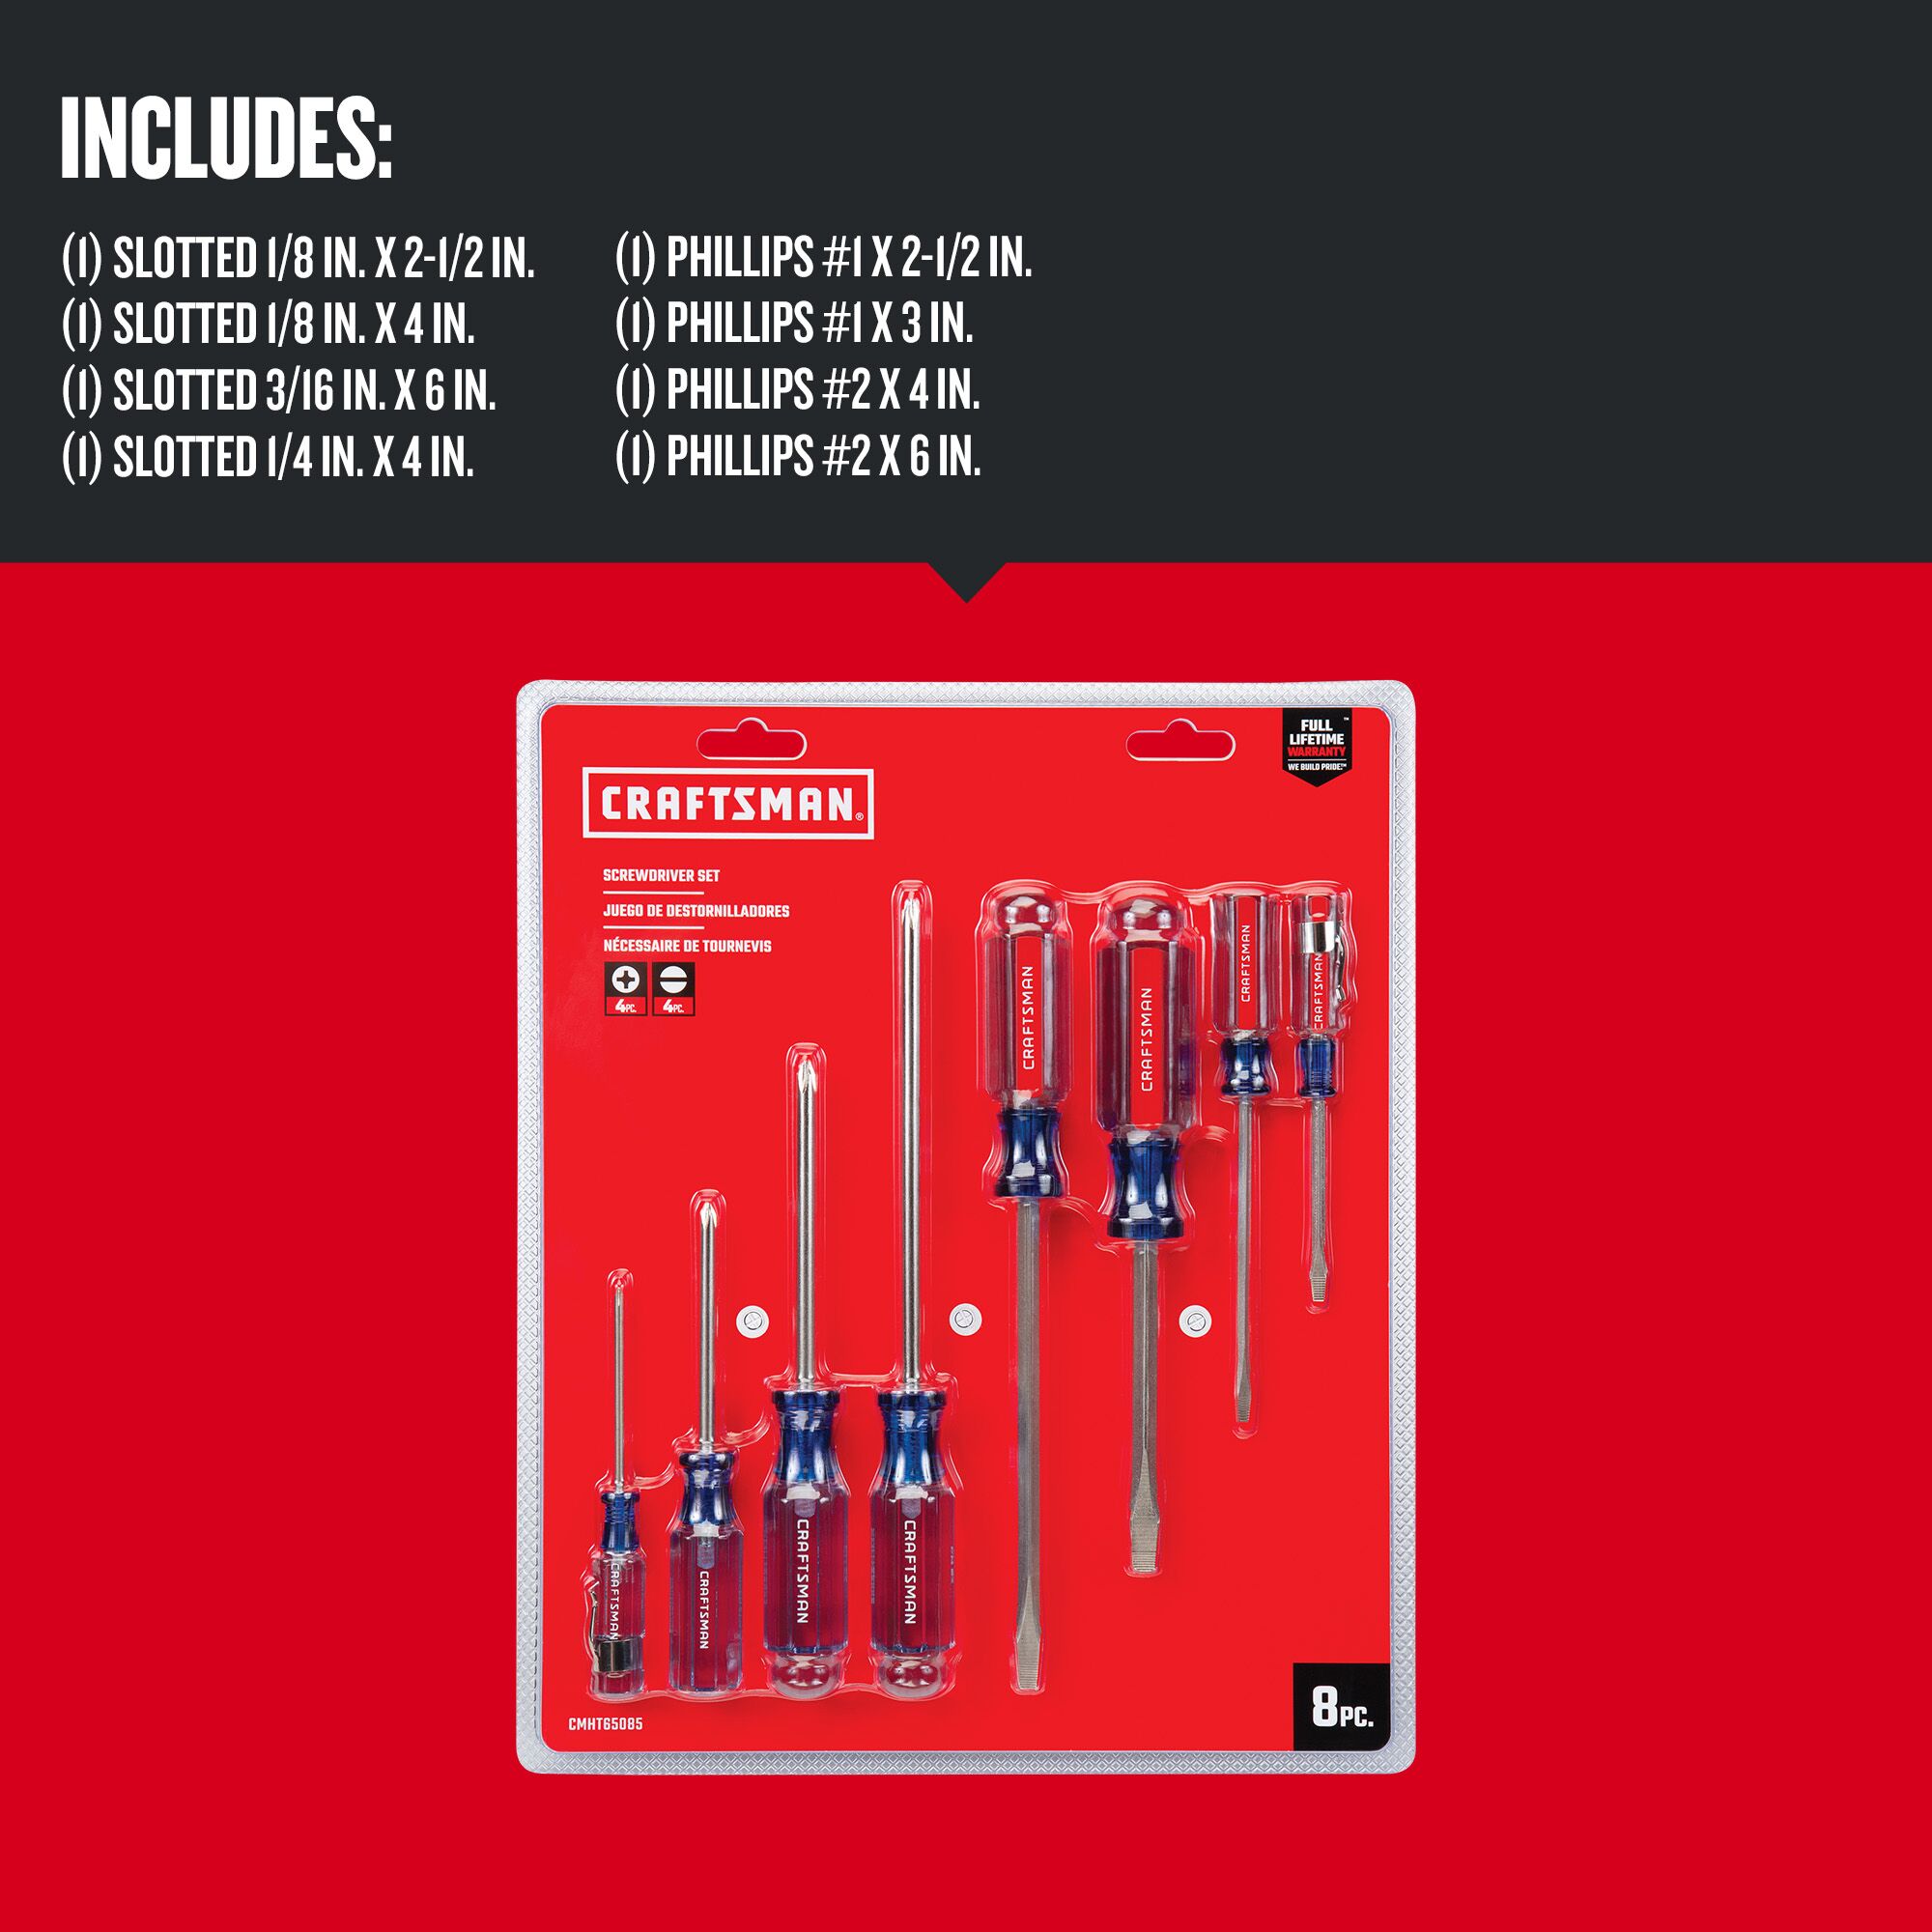 Graphic of CRAFTSMAN Screwdrivers: Acetate highlighting product features